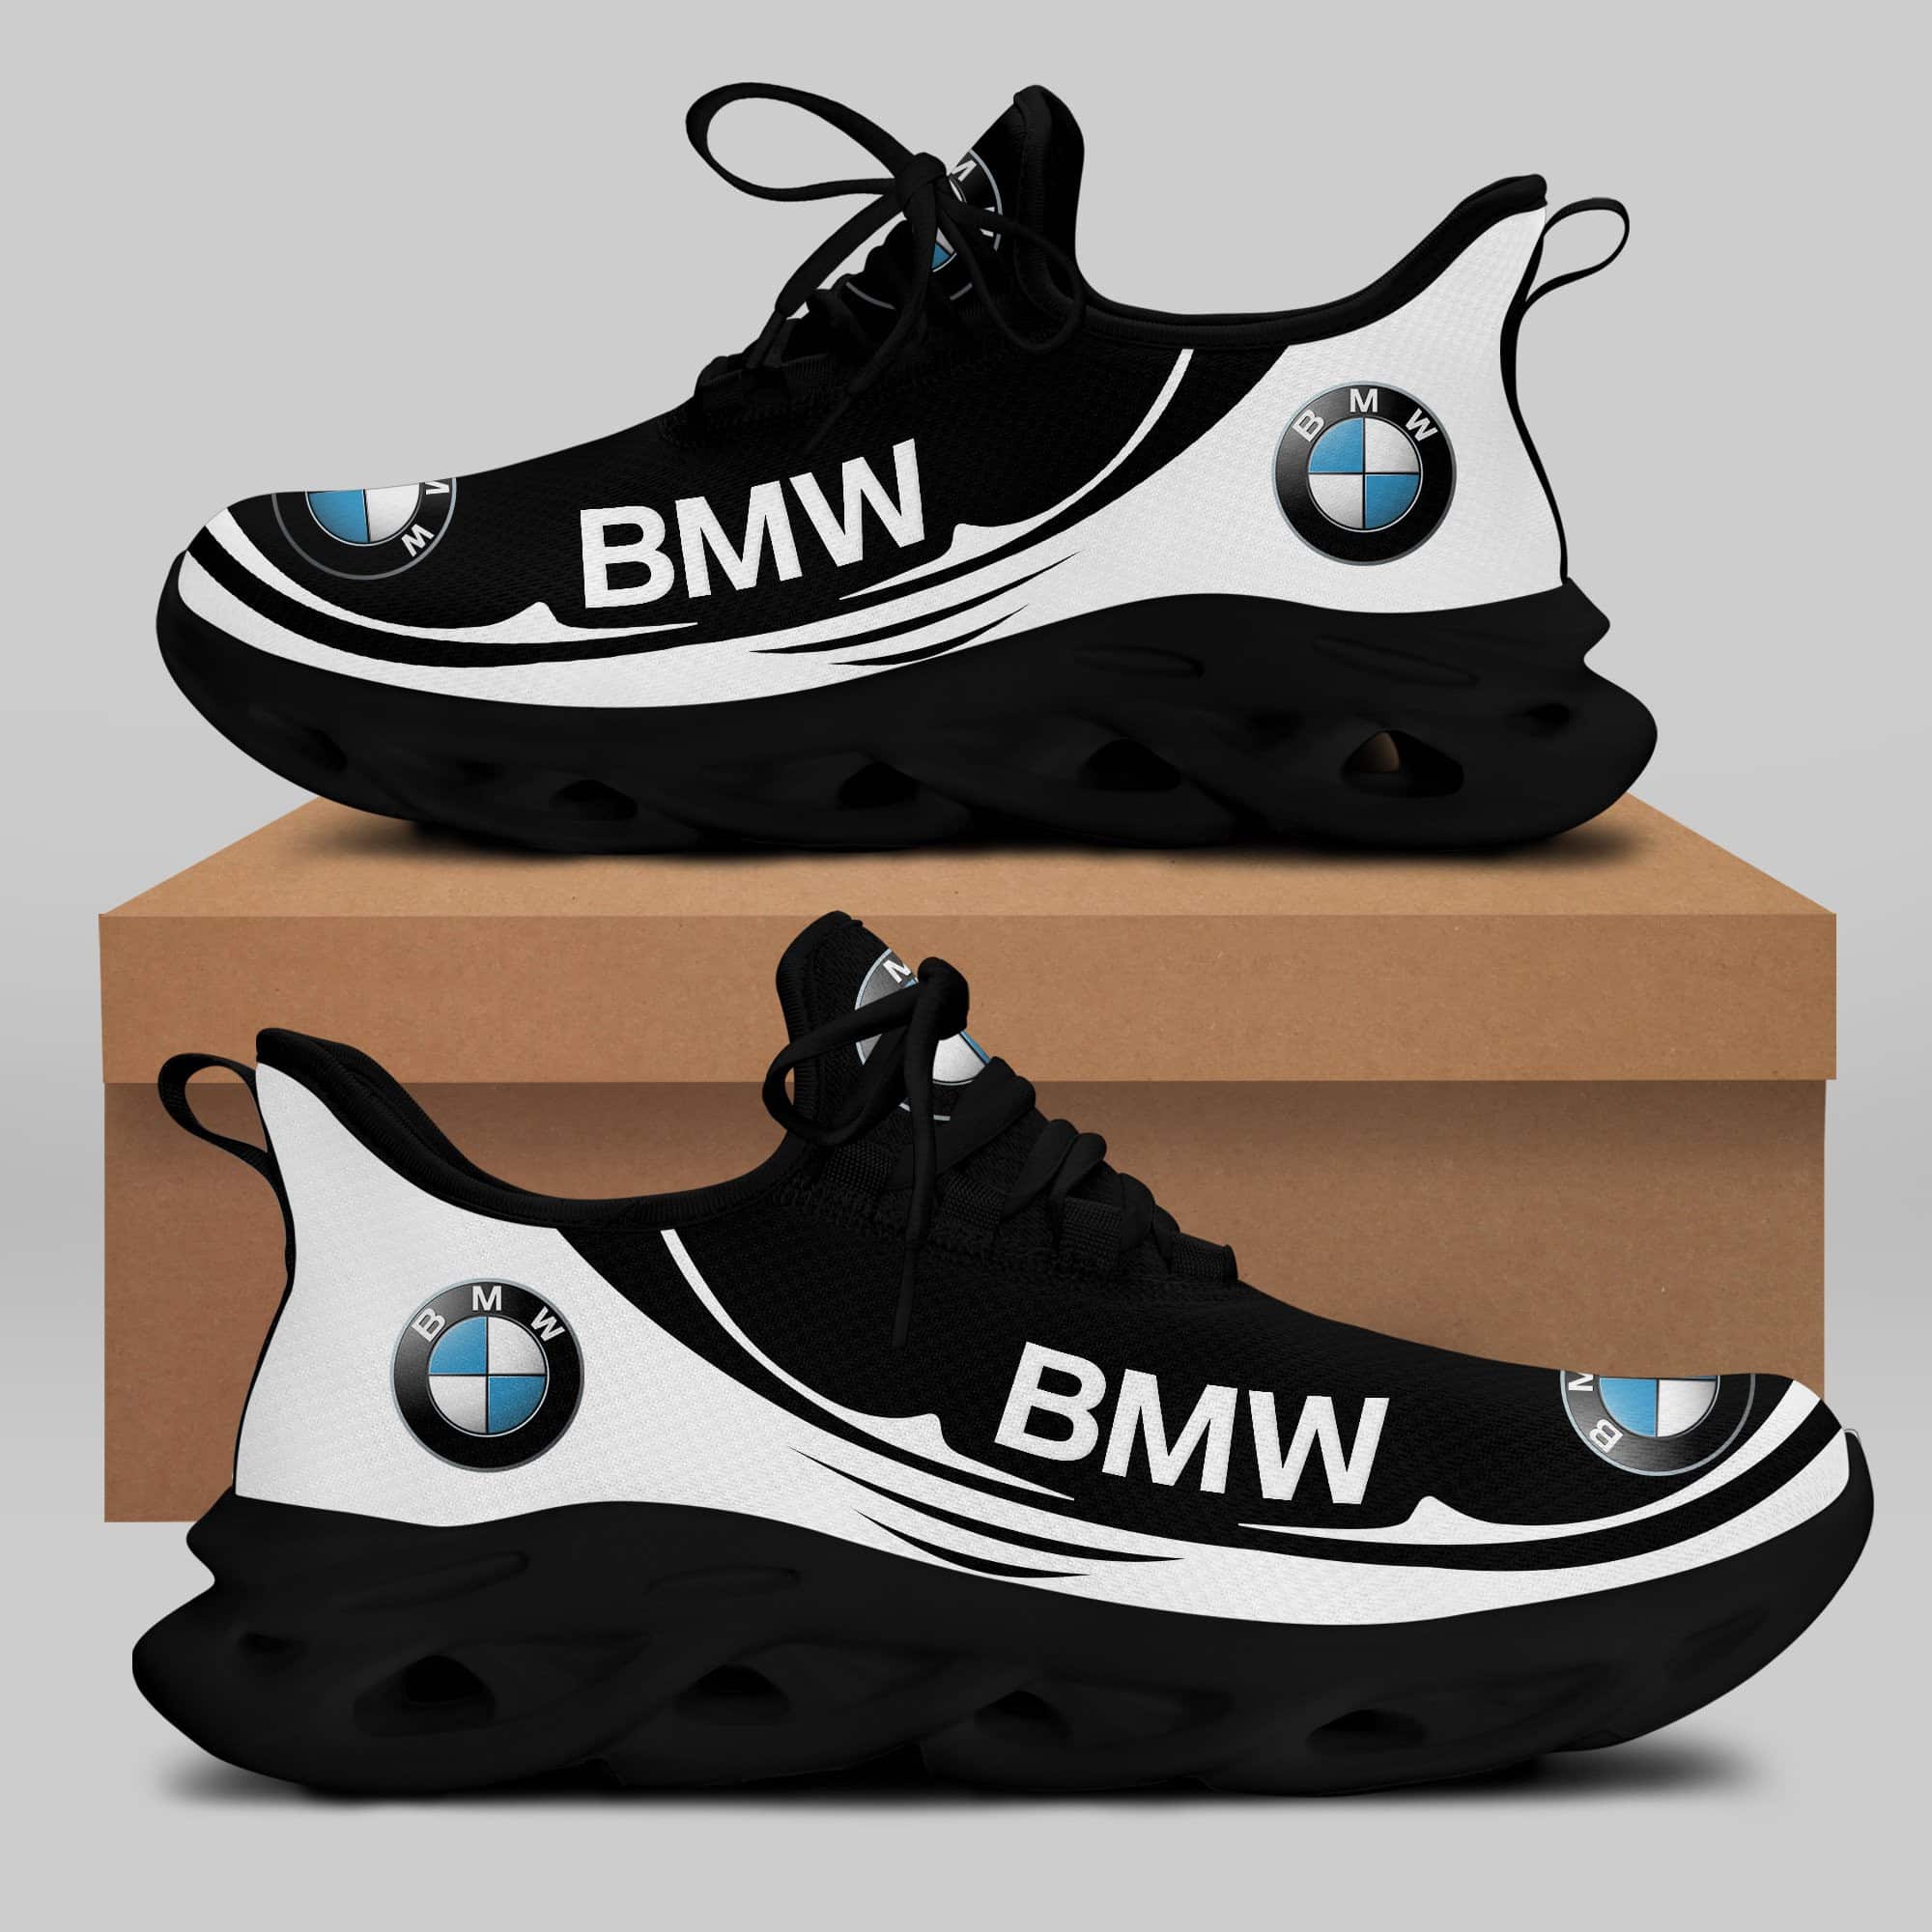 Bmw Running Shoes Max Soul Shoes Sneakers Ver 29 2